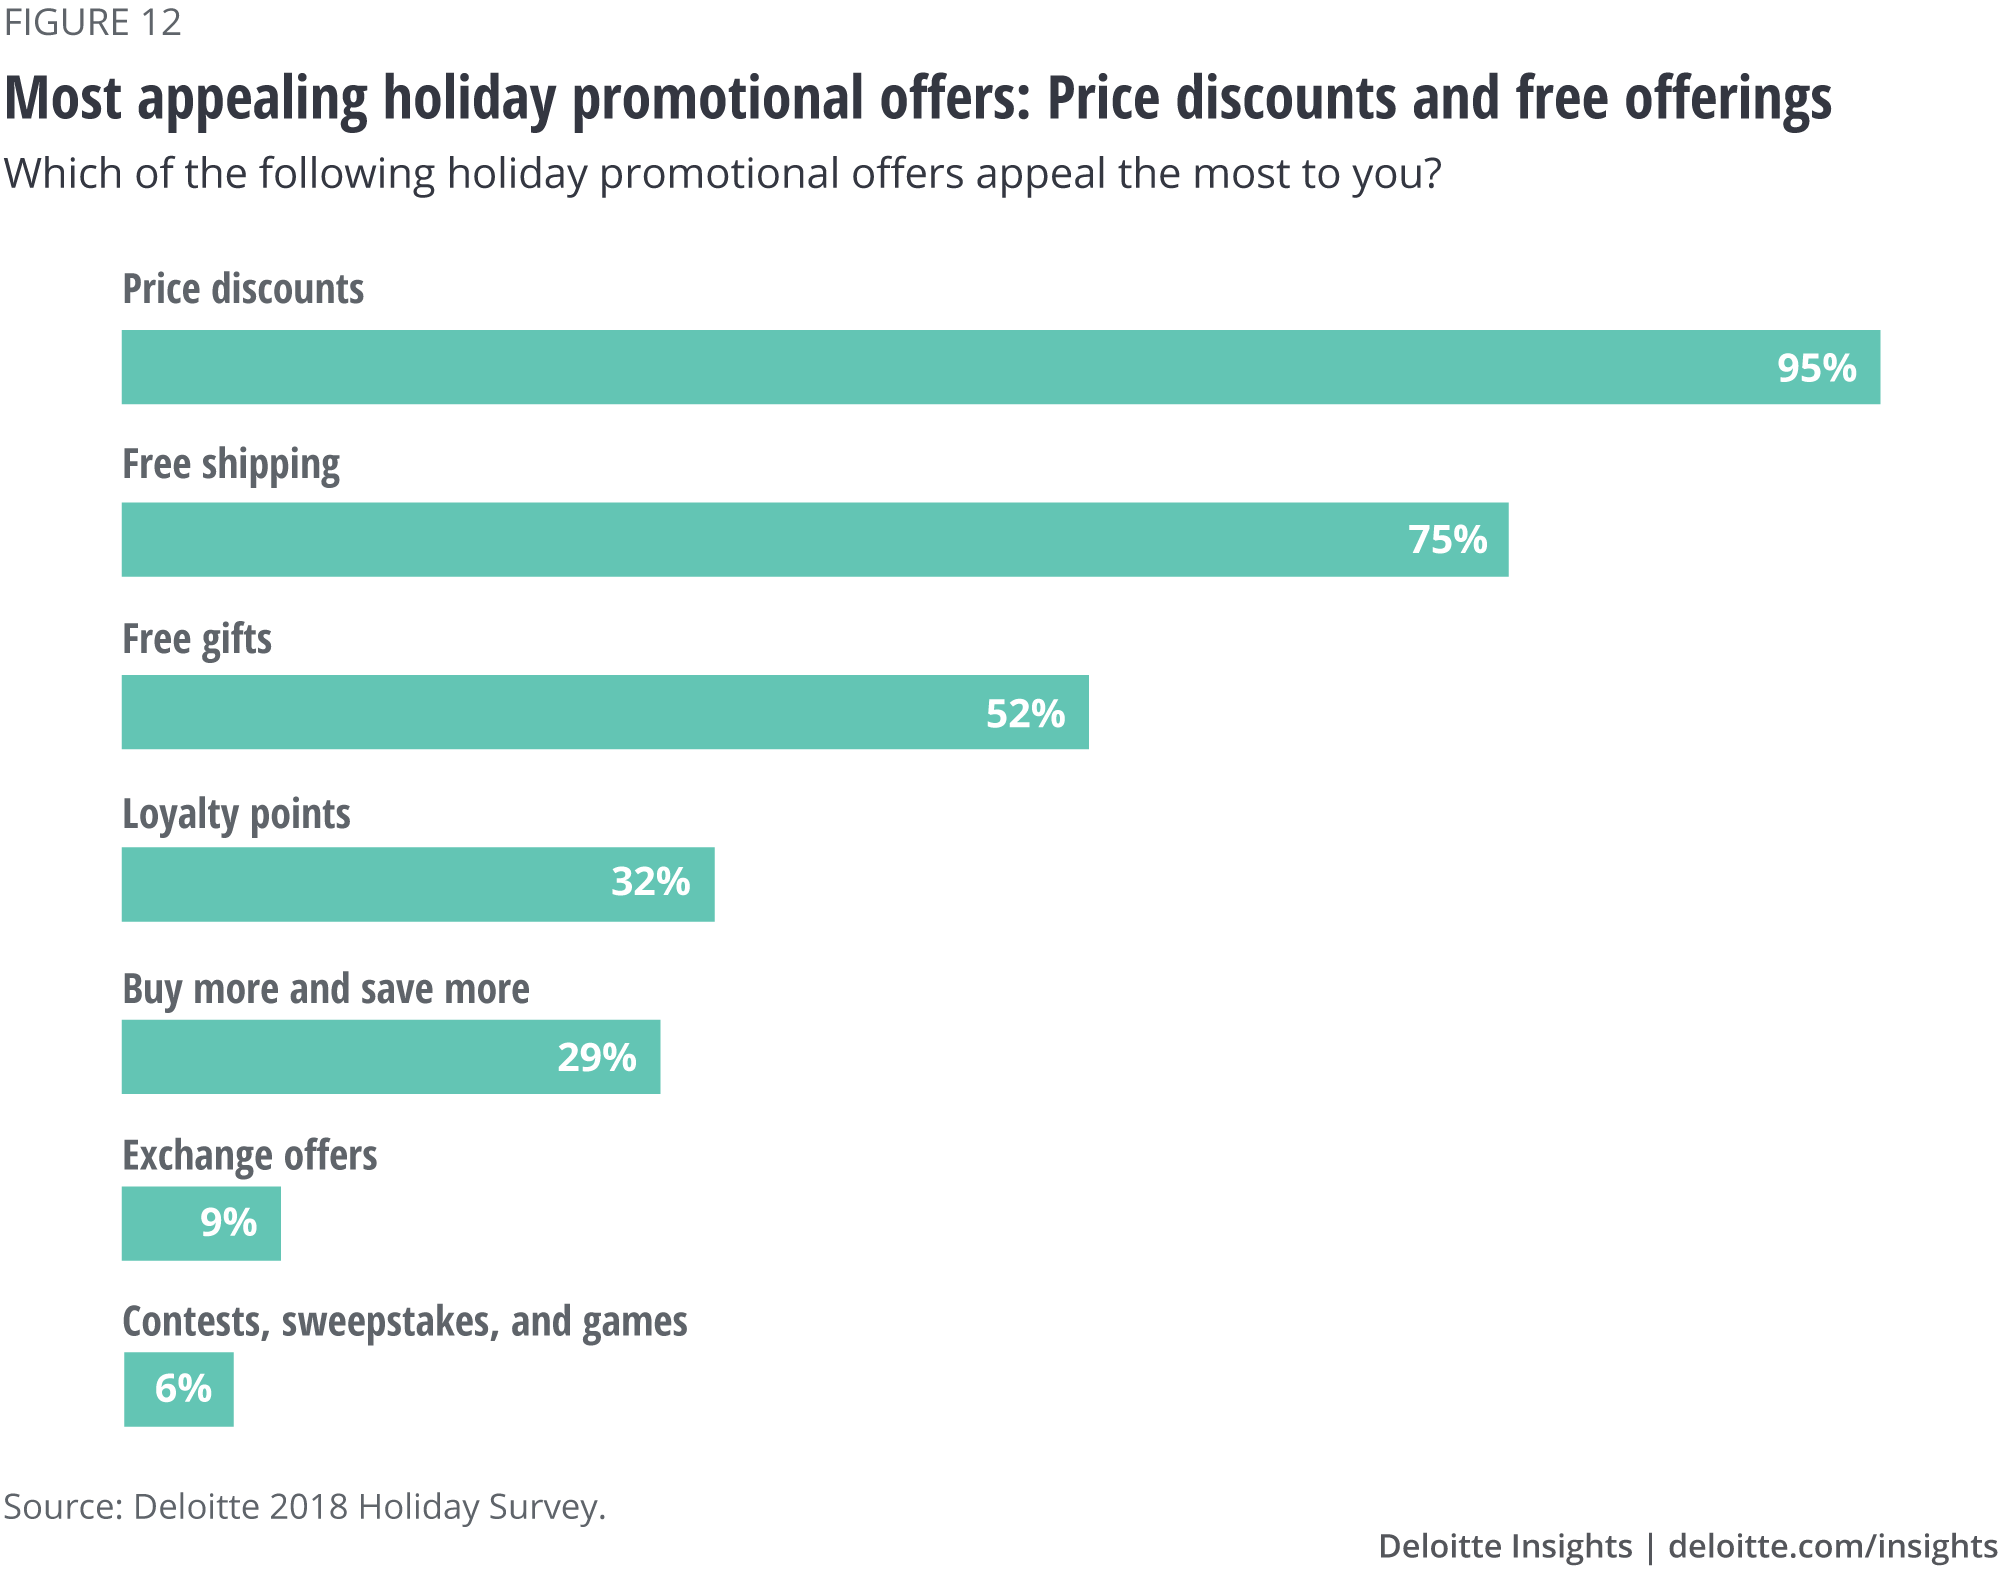 Most appealing holiday promotional offers: Price discounts and free offerings